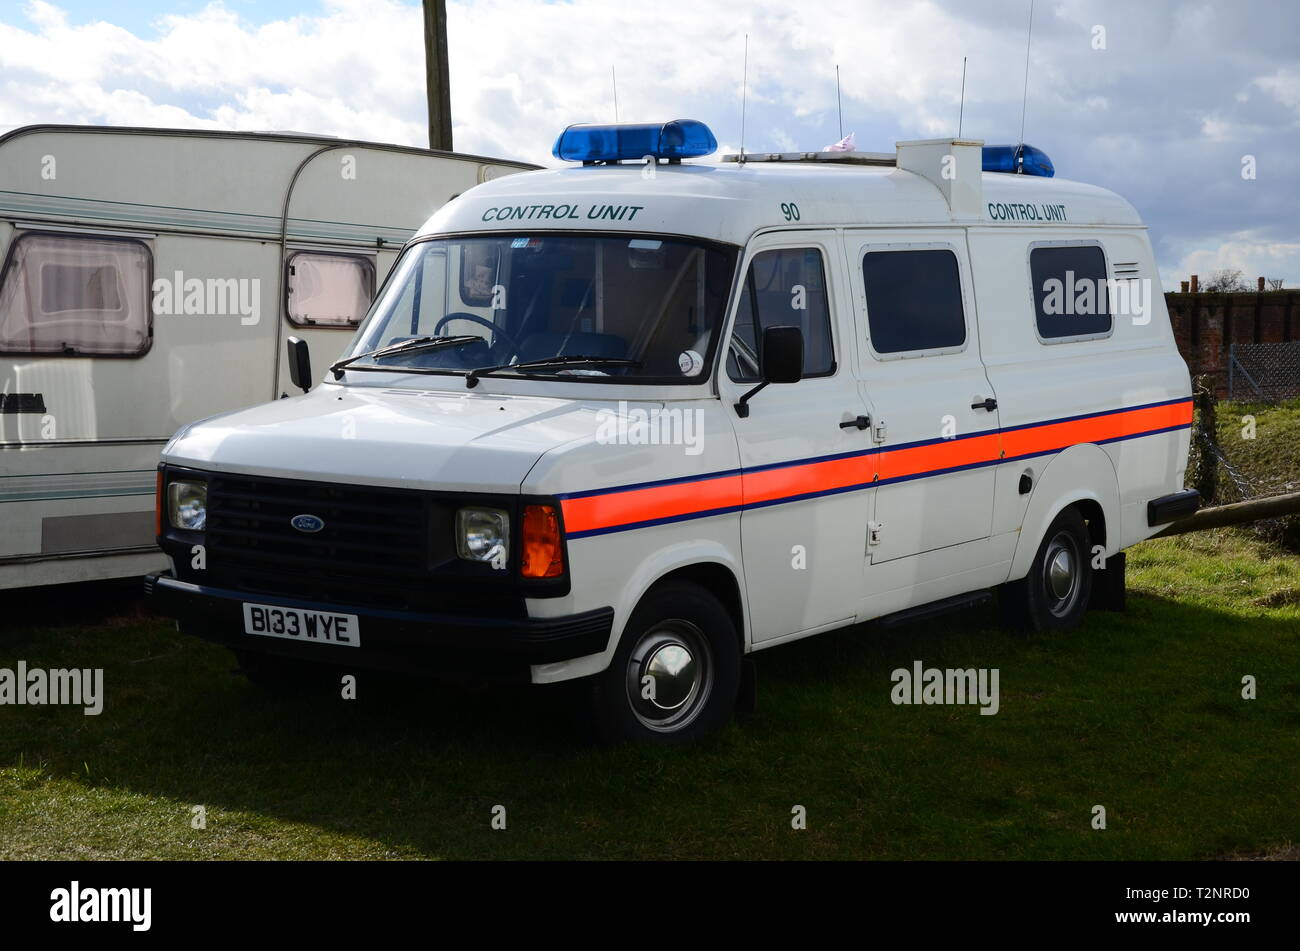 police command and control unit Stock Photo